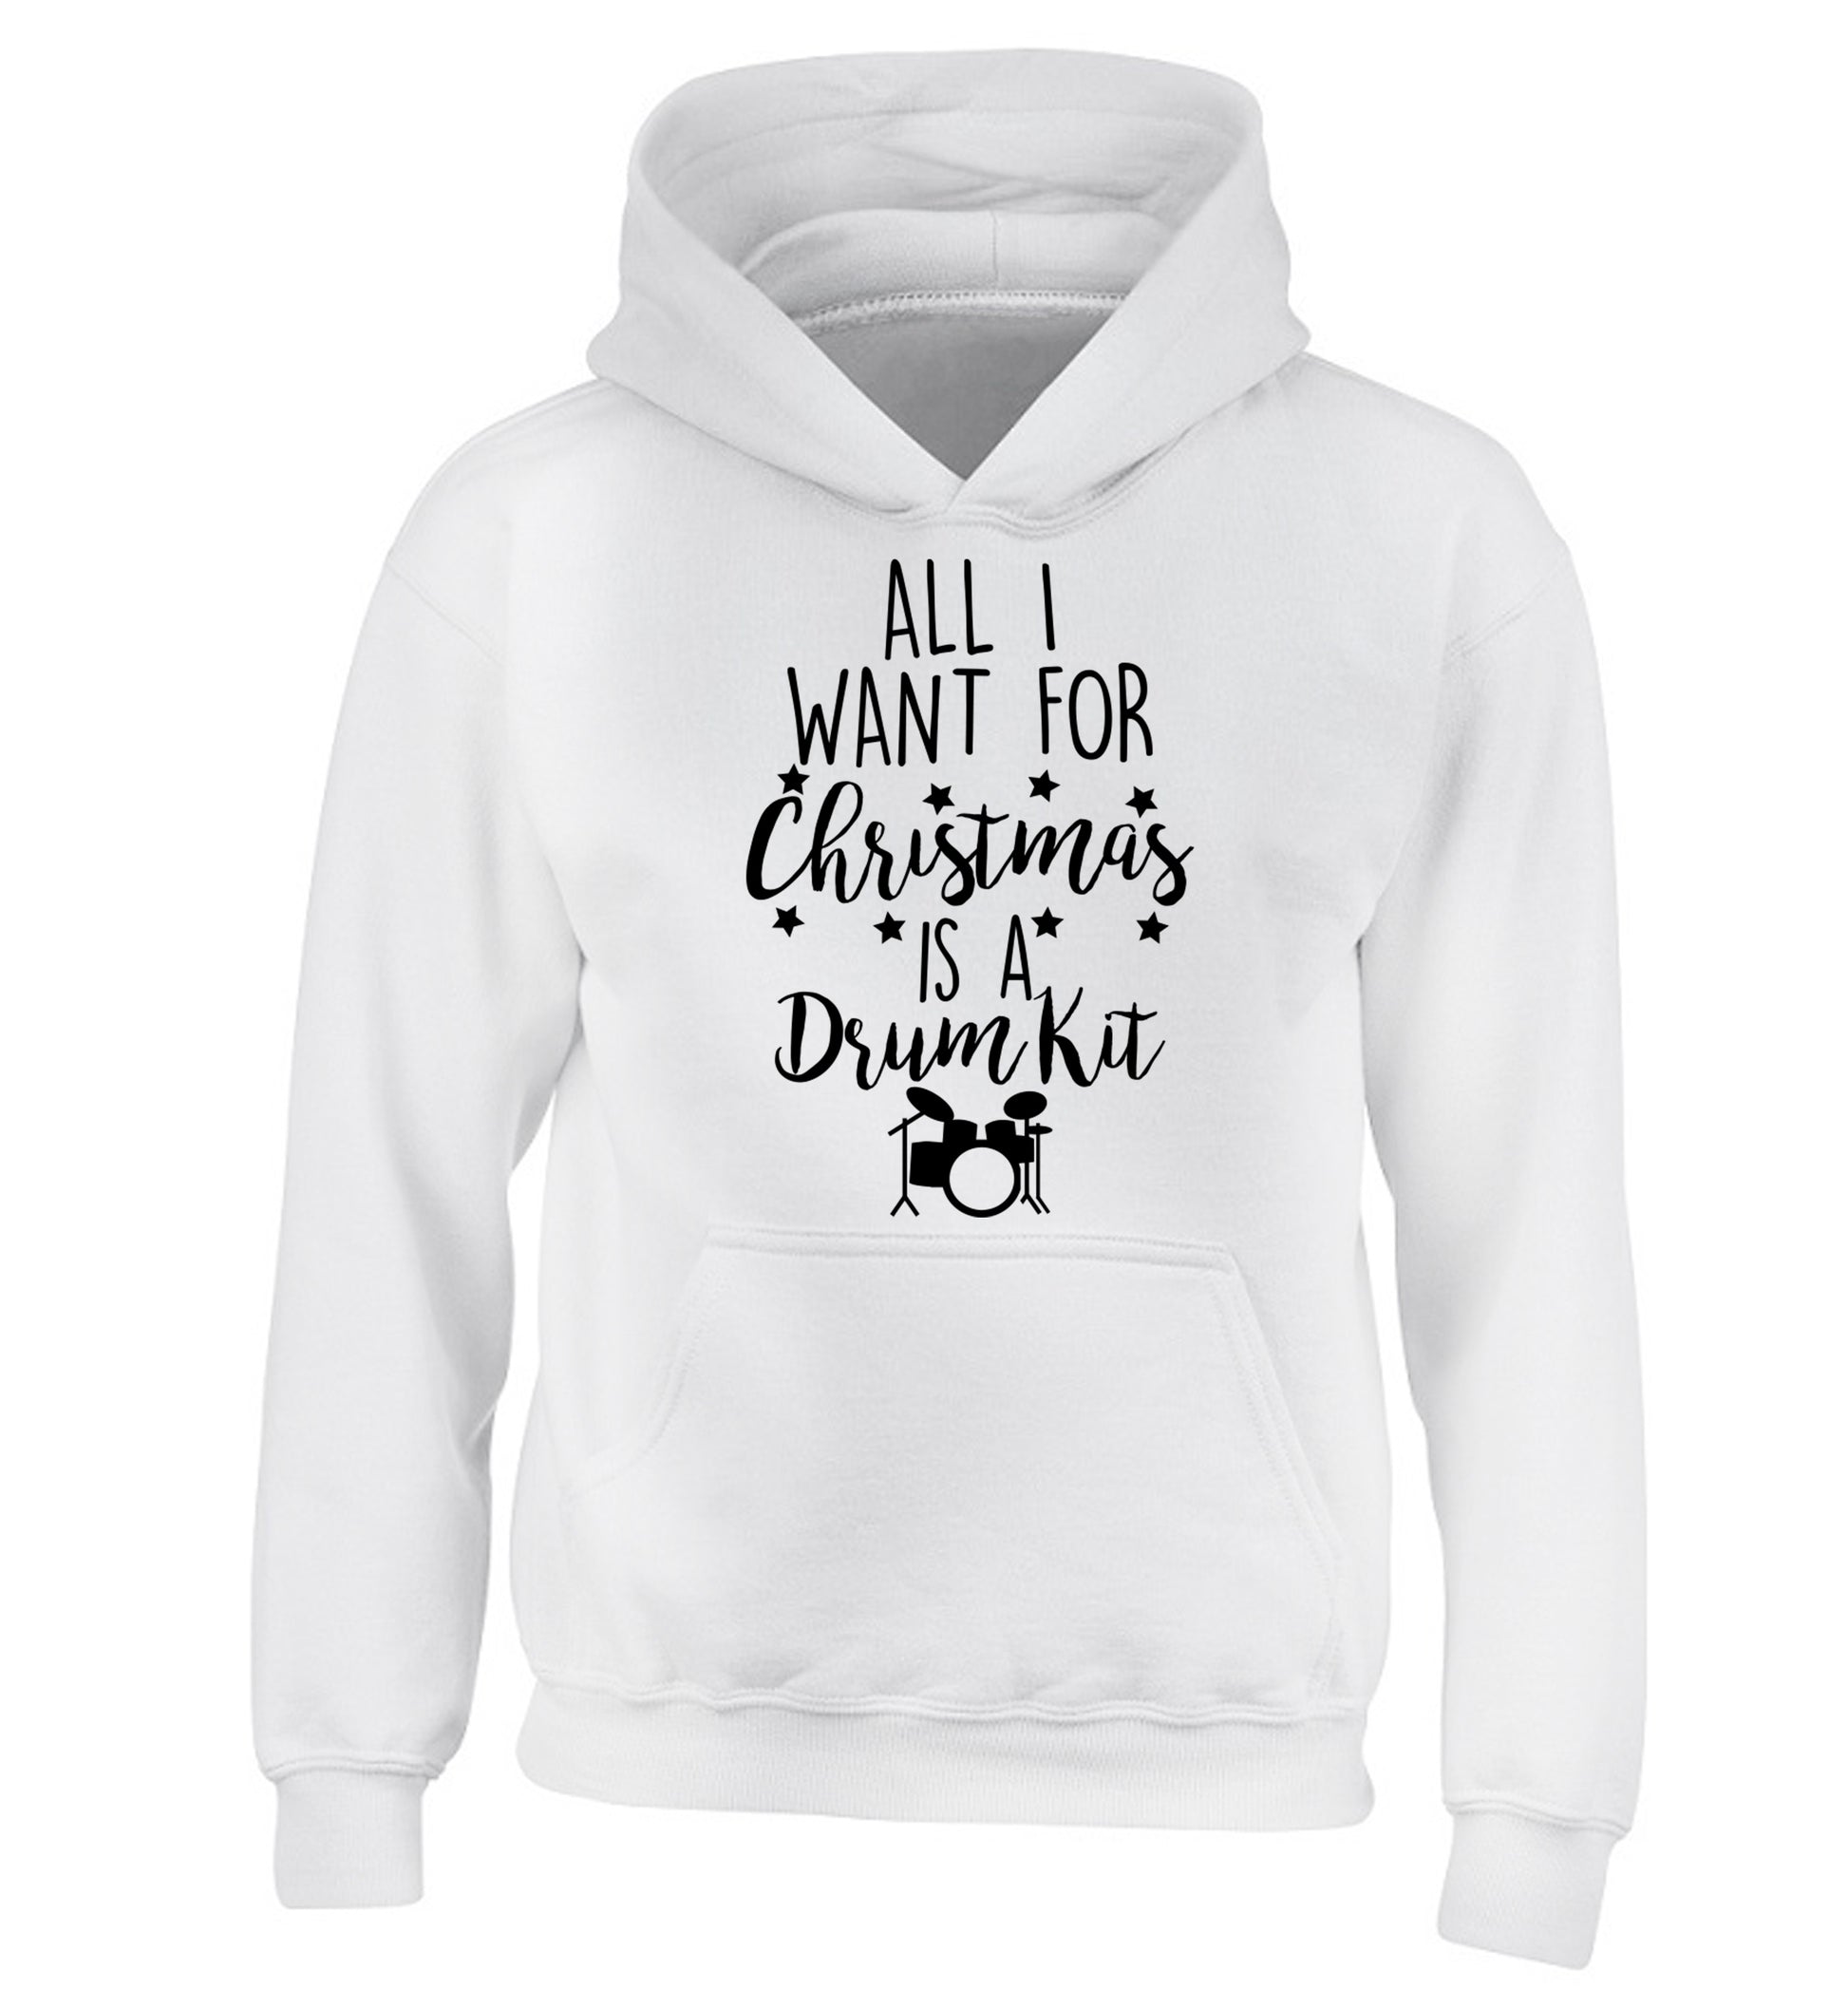 All I want for Christmas is a drum kit! children's white hoodie 12-14 Years